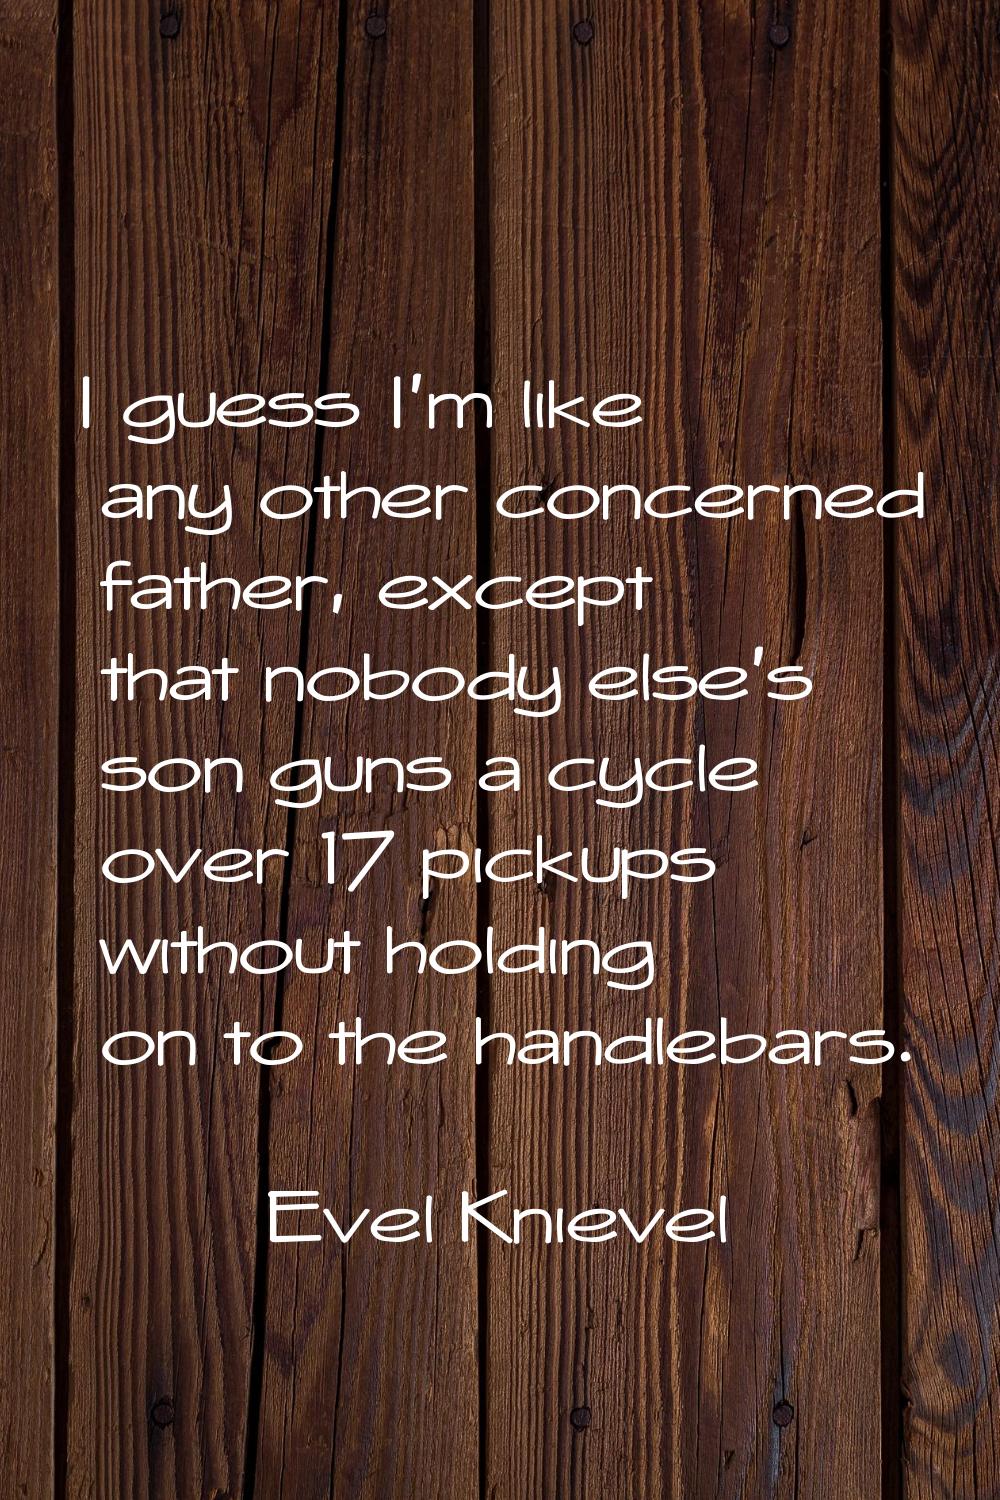 I guess I'm like any other concerned father, except that nobody else's son guns a cycle over 17 pic